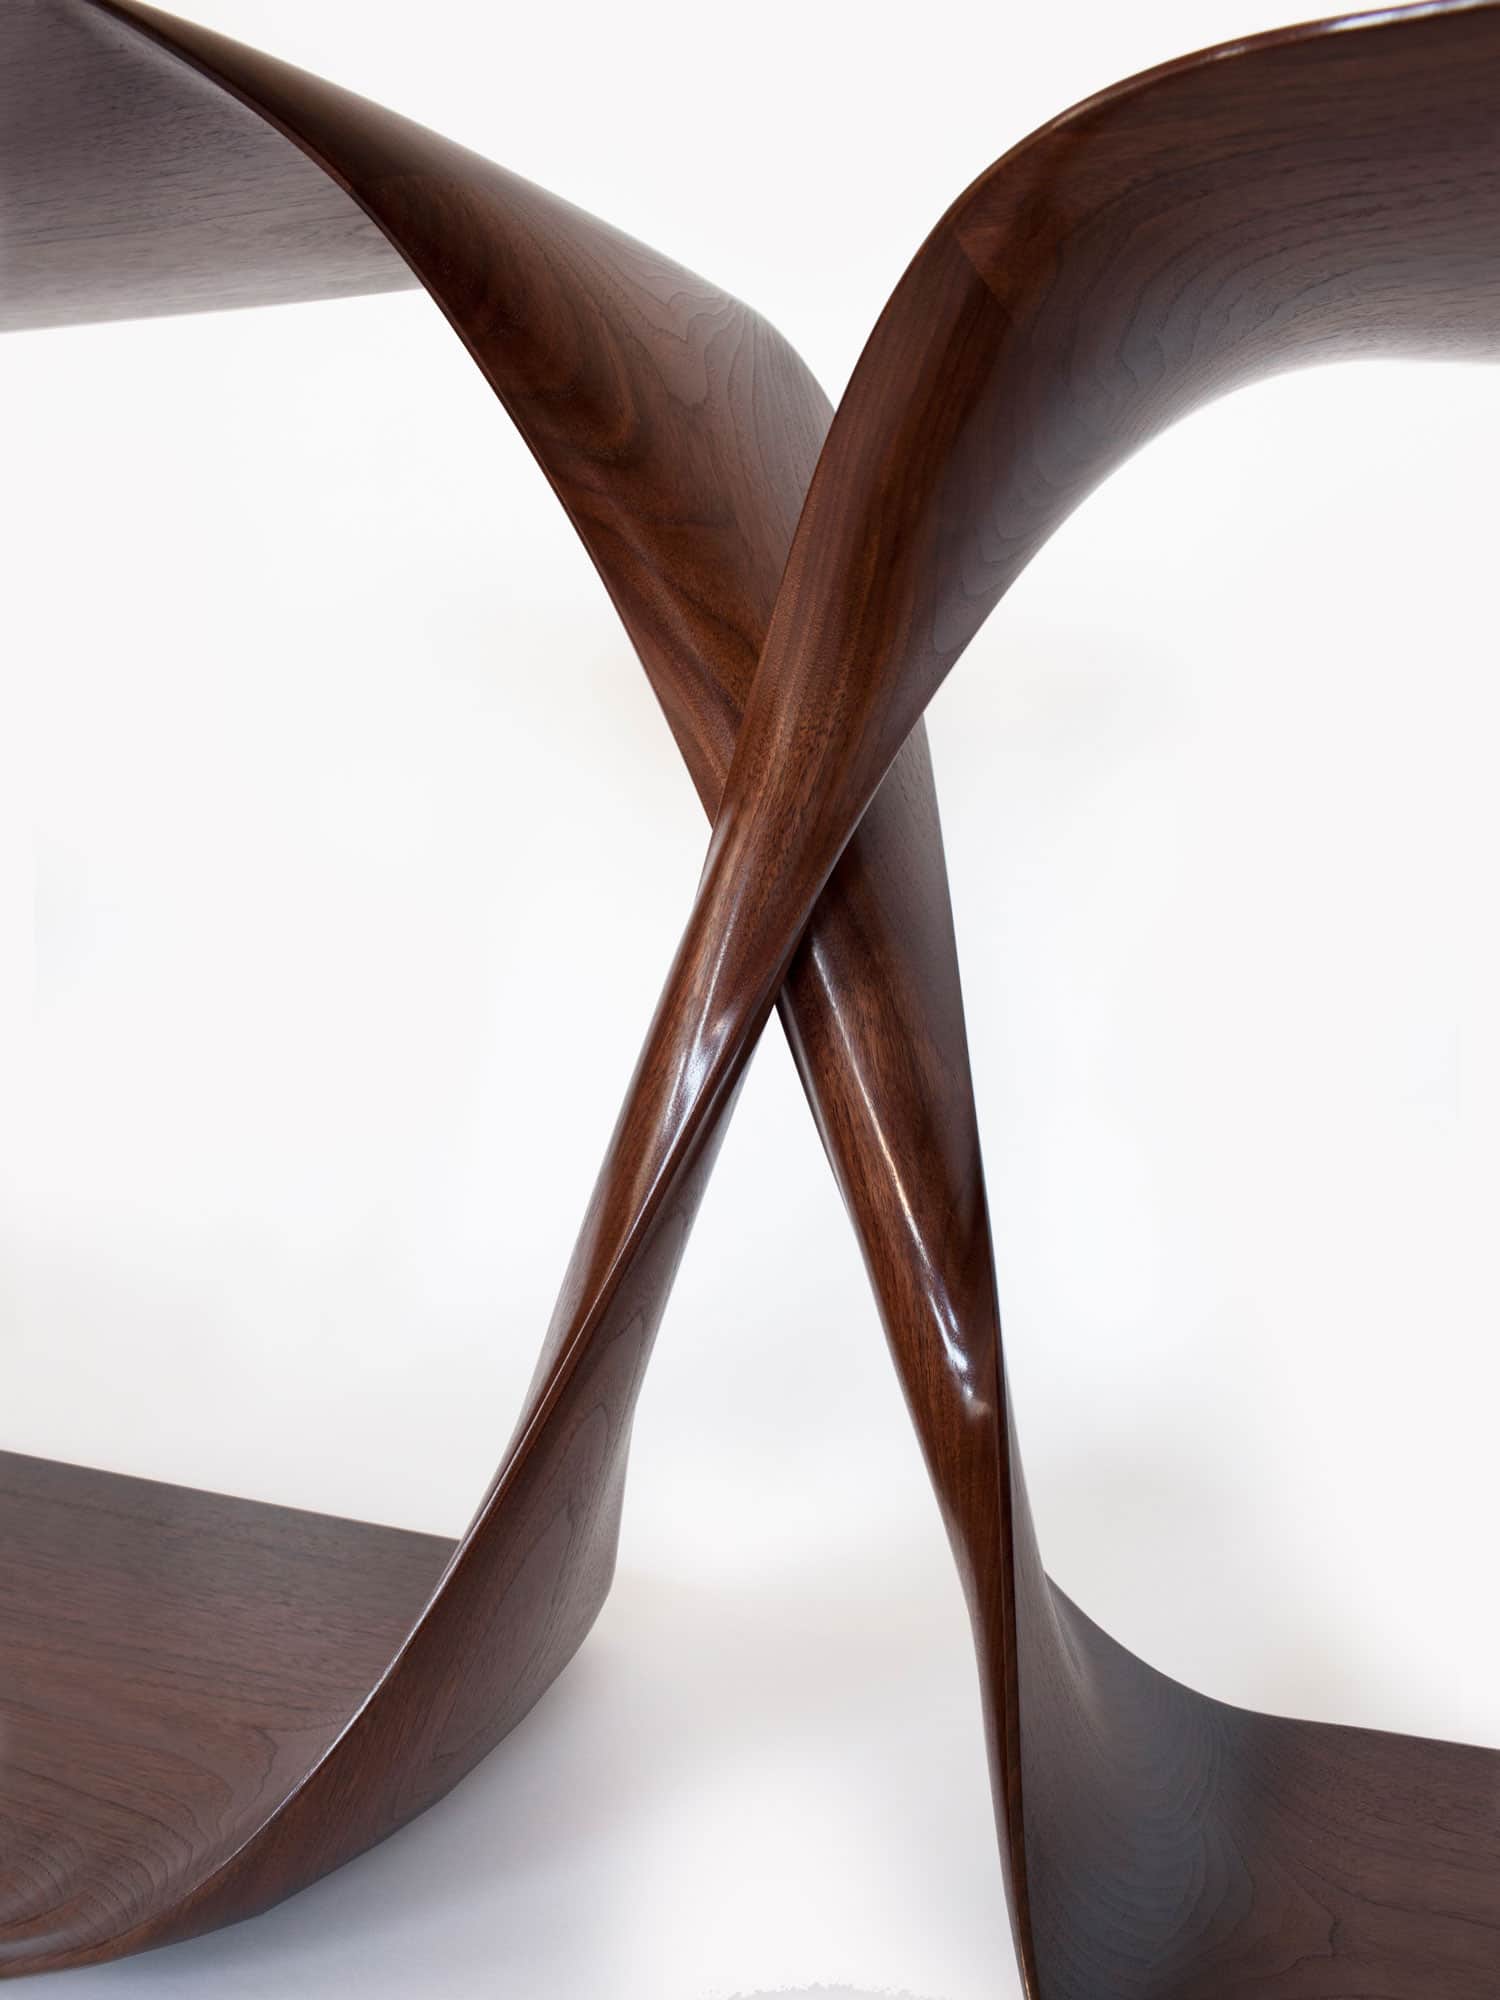 This image shows a close-up detail of the center sculptural carved section of the CE12 Freestanding Console designed by Carol Egan.  Shown here in an American Walnut Finish - the dimensions of the piece are 29/26"h x 72"w x 18/16"d (74/65 x185 x 45/40cm).